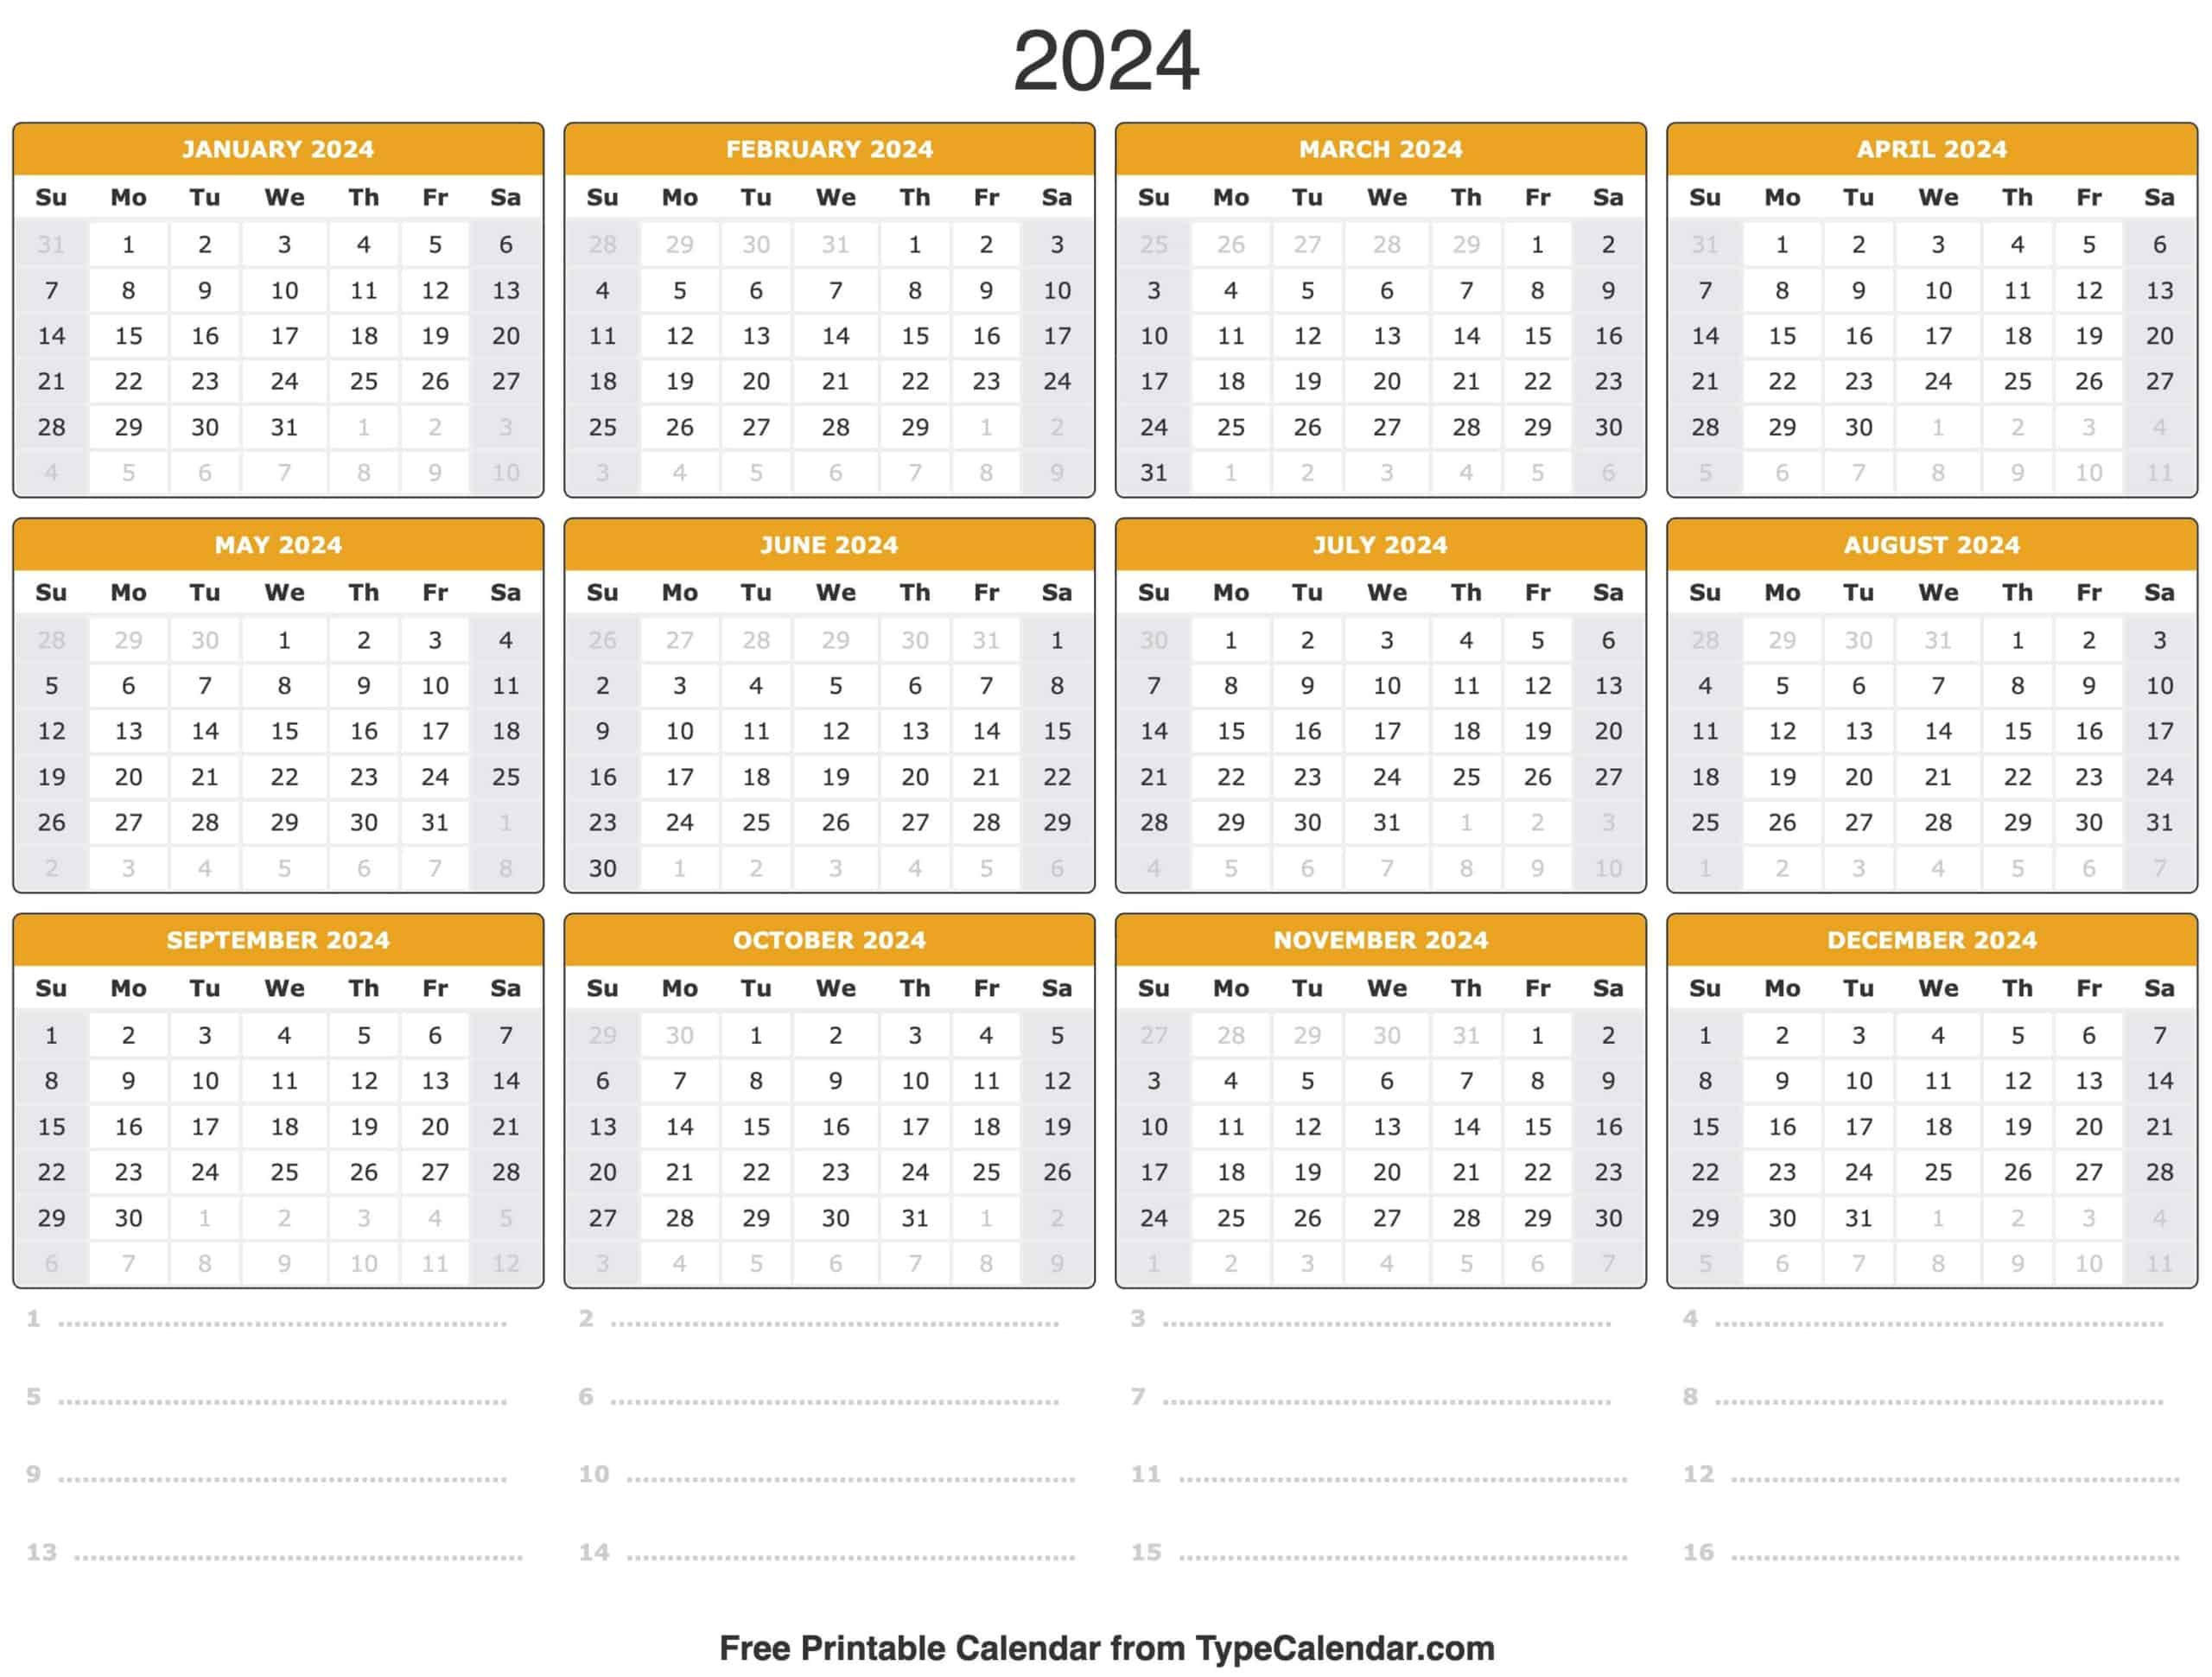 2024 Calendar: Free Printable Calendar With Holidays | Is 2024 The Next Leap Year